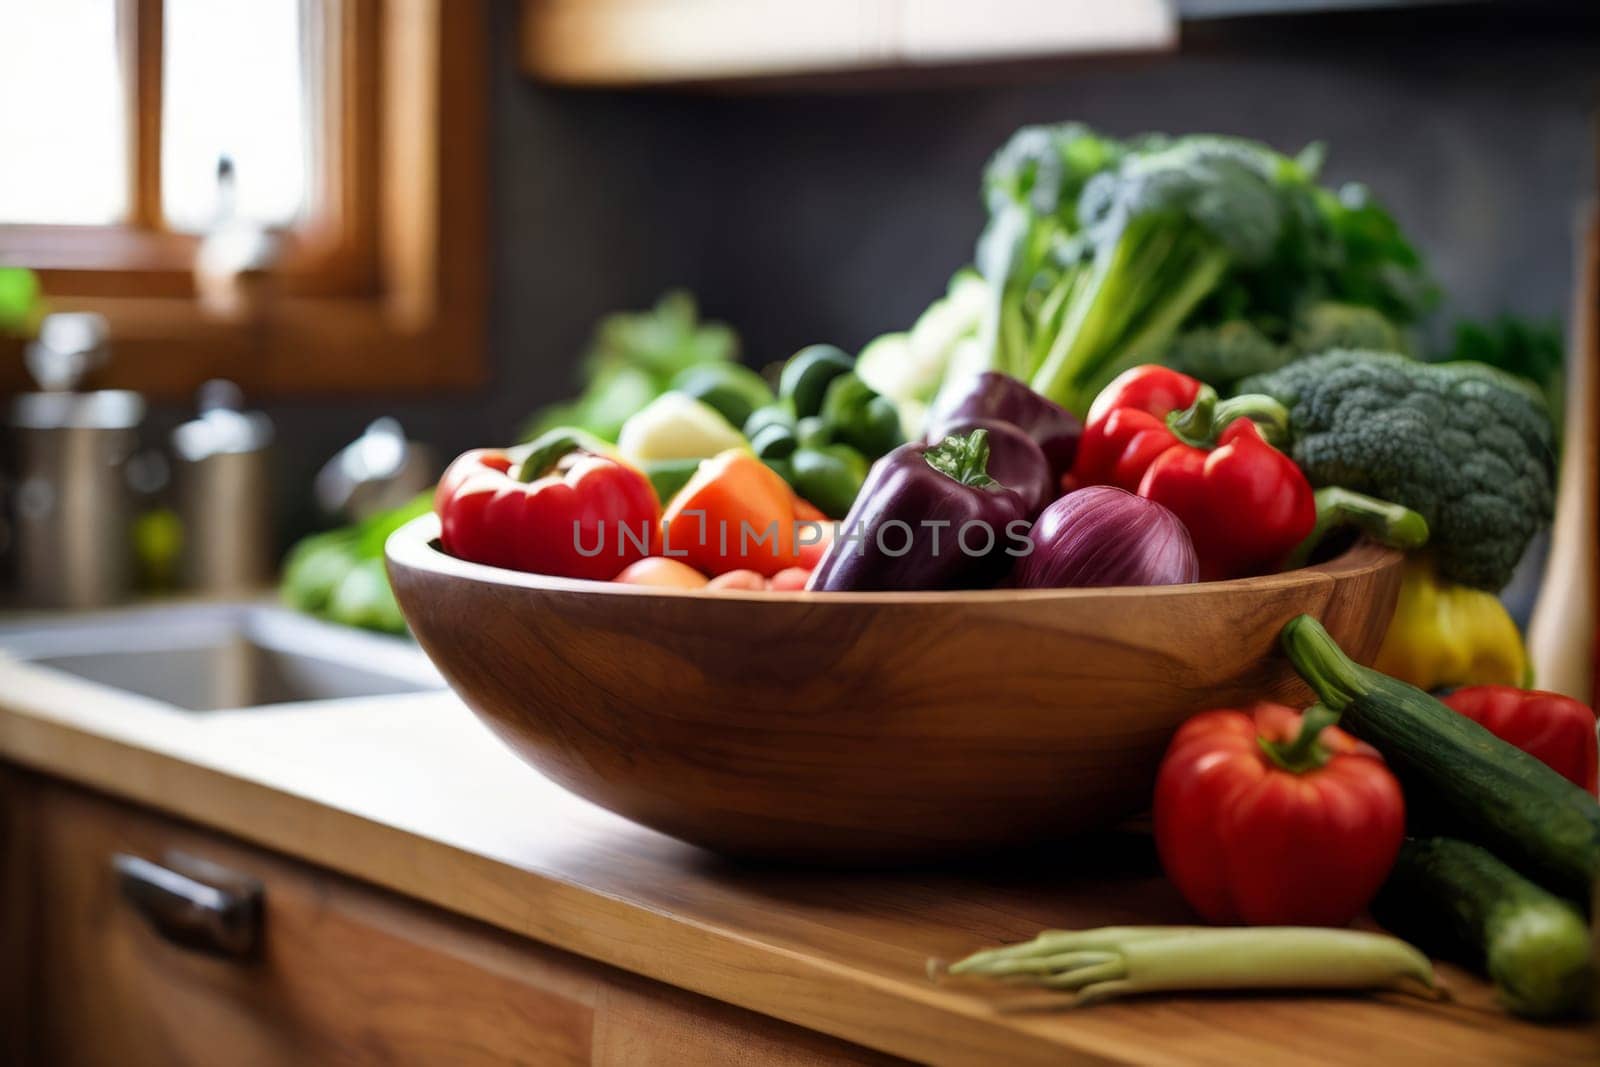 Witness a cornucopia of fresh vegetables in a wooden bowl resting on a kitchen counter, exuding the wholesome essence of homegrown and organic produce.